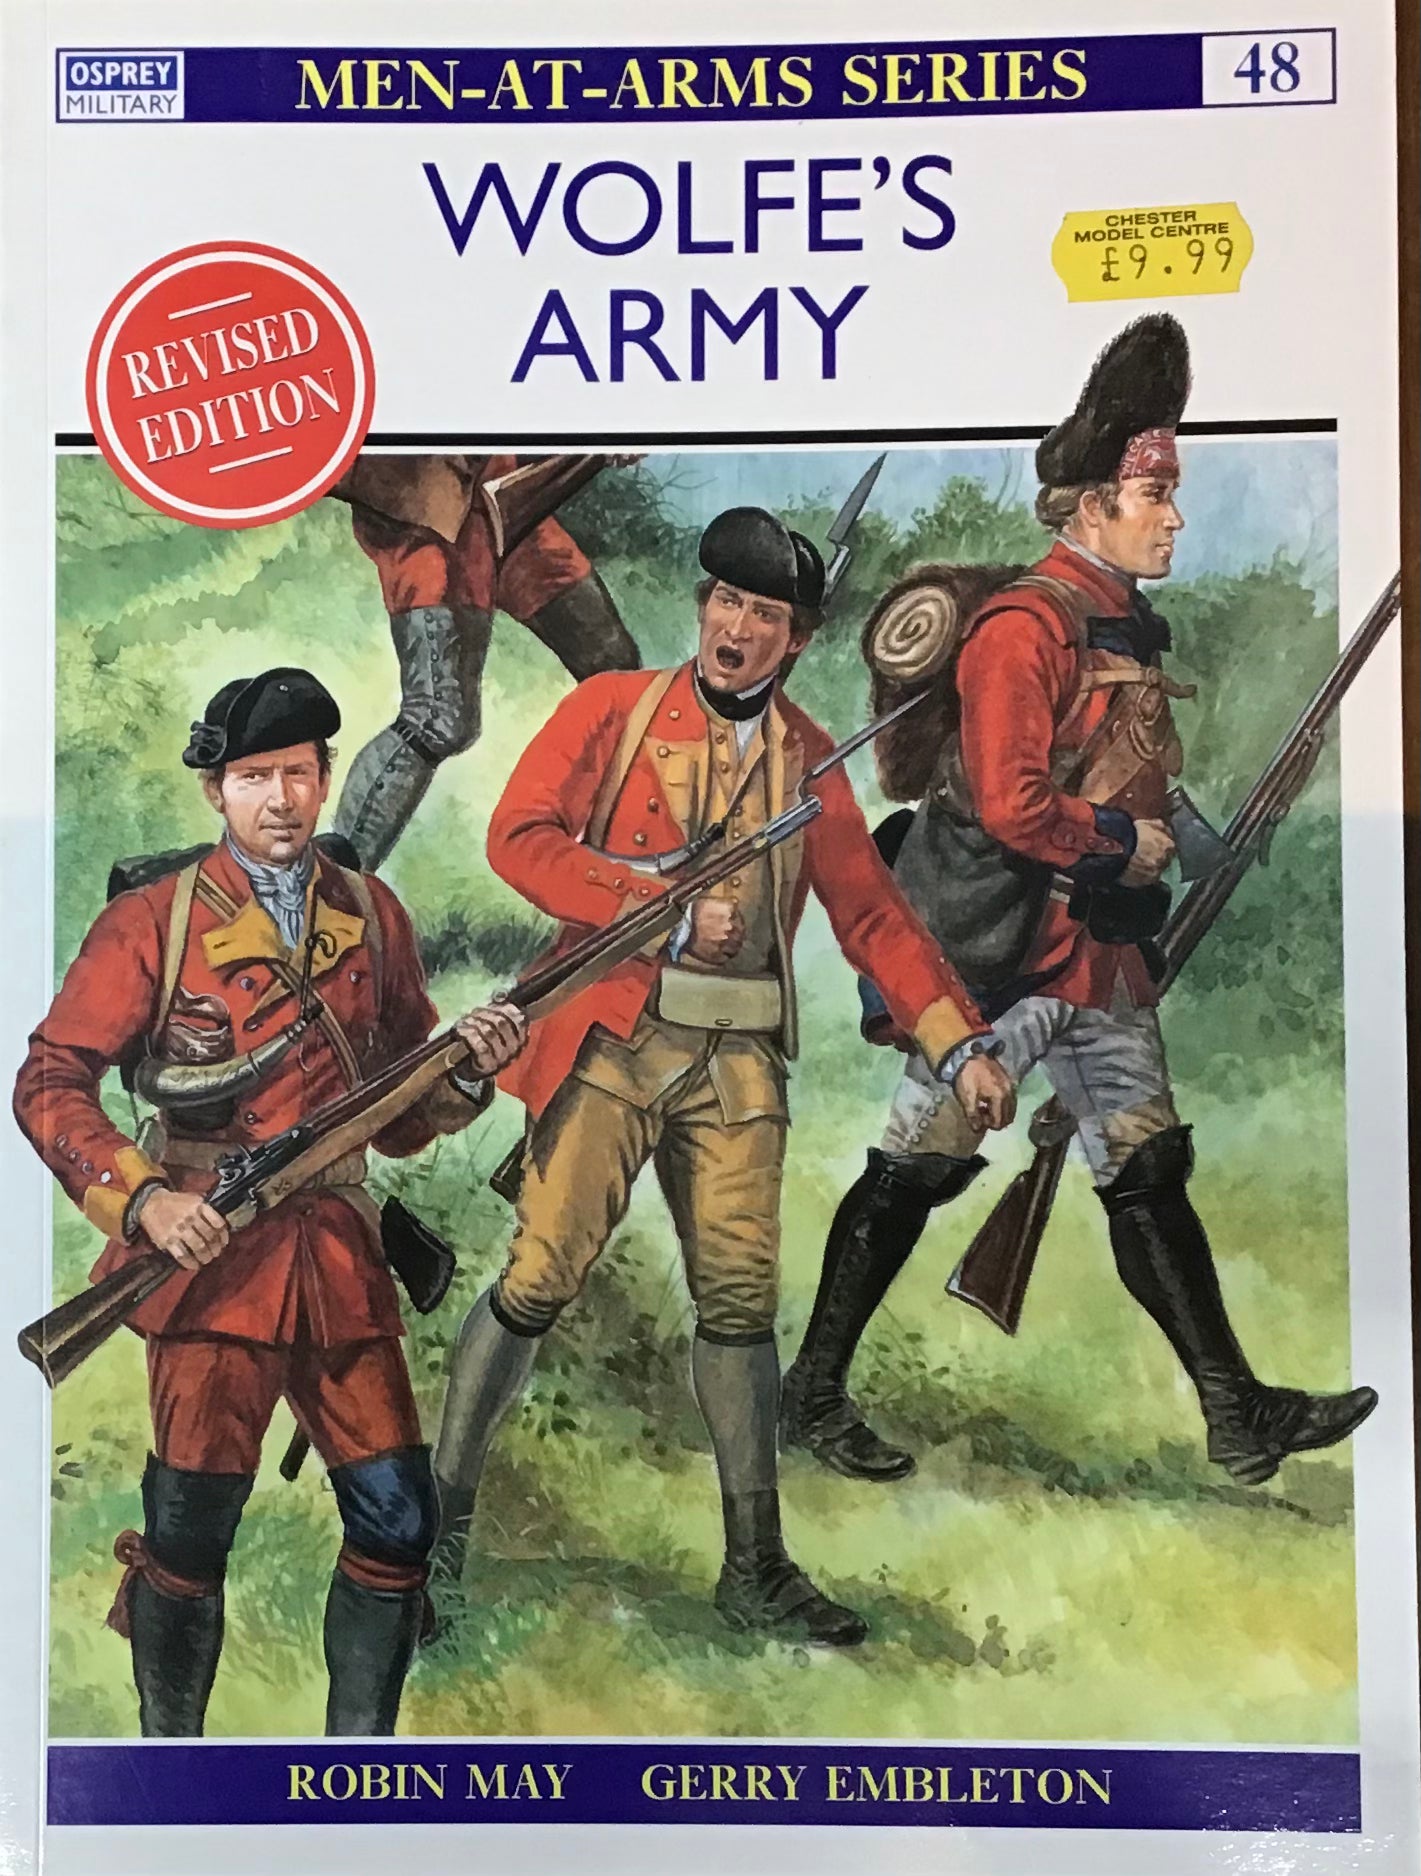 Wolfe's Army Revised Edition by Robin May and Gerry Embleton - Chester Model Centre